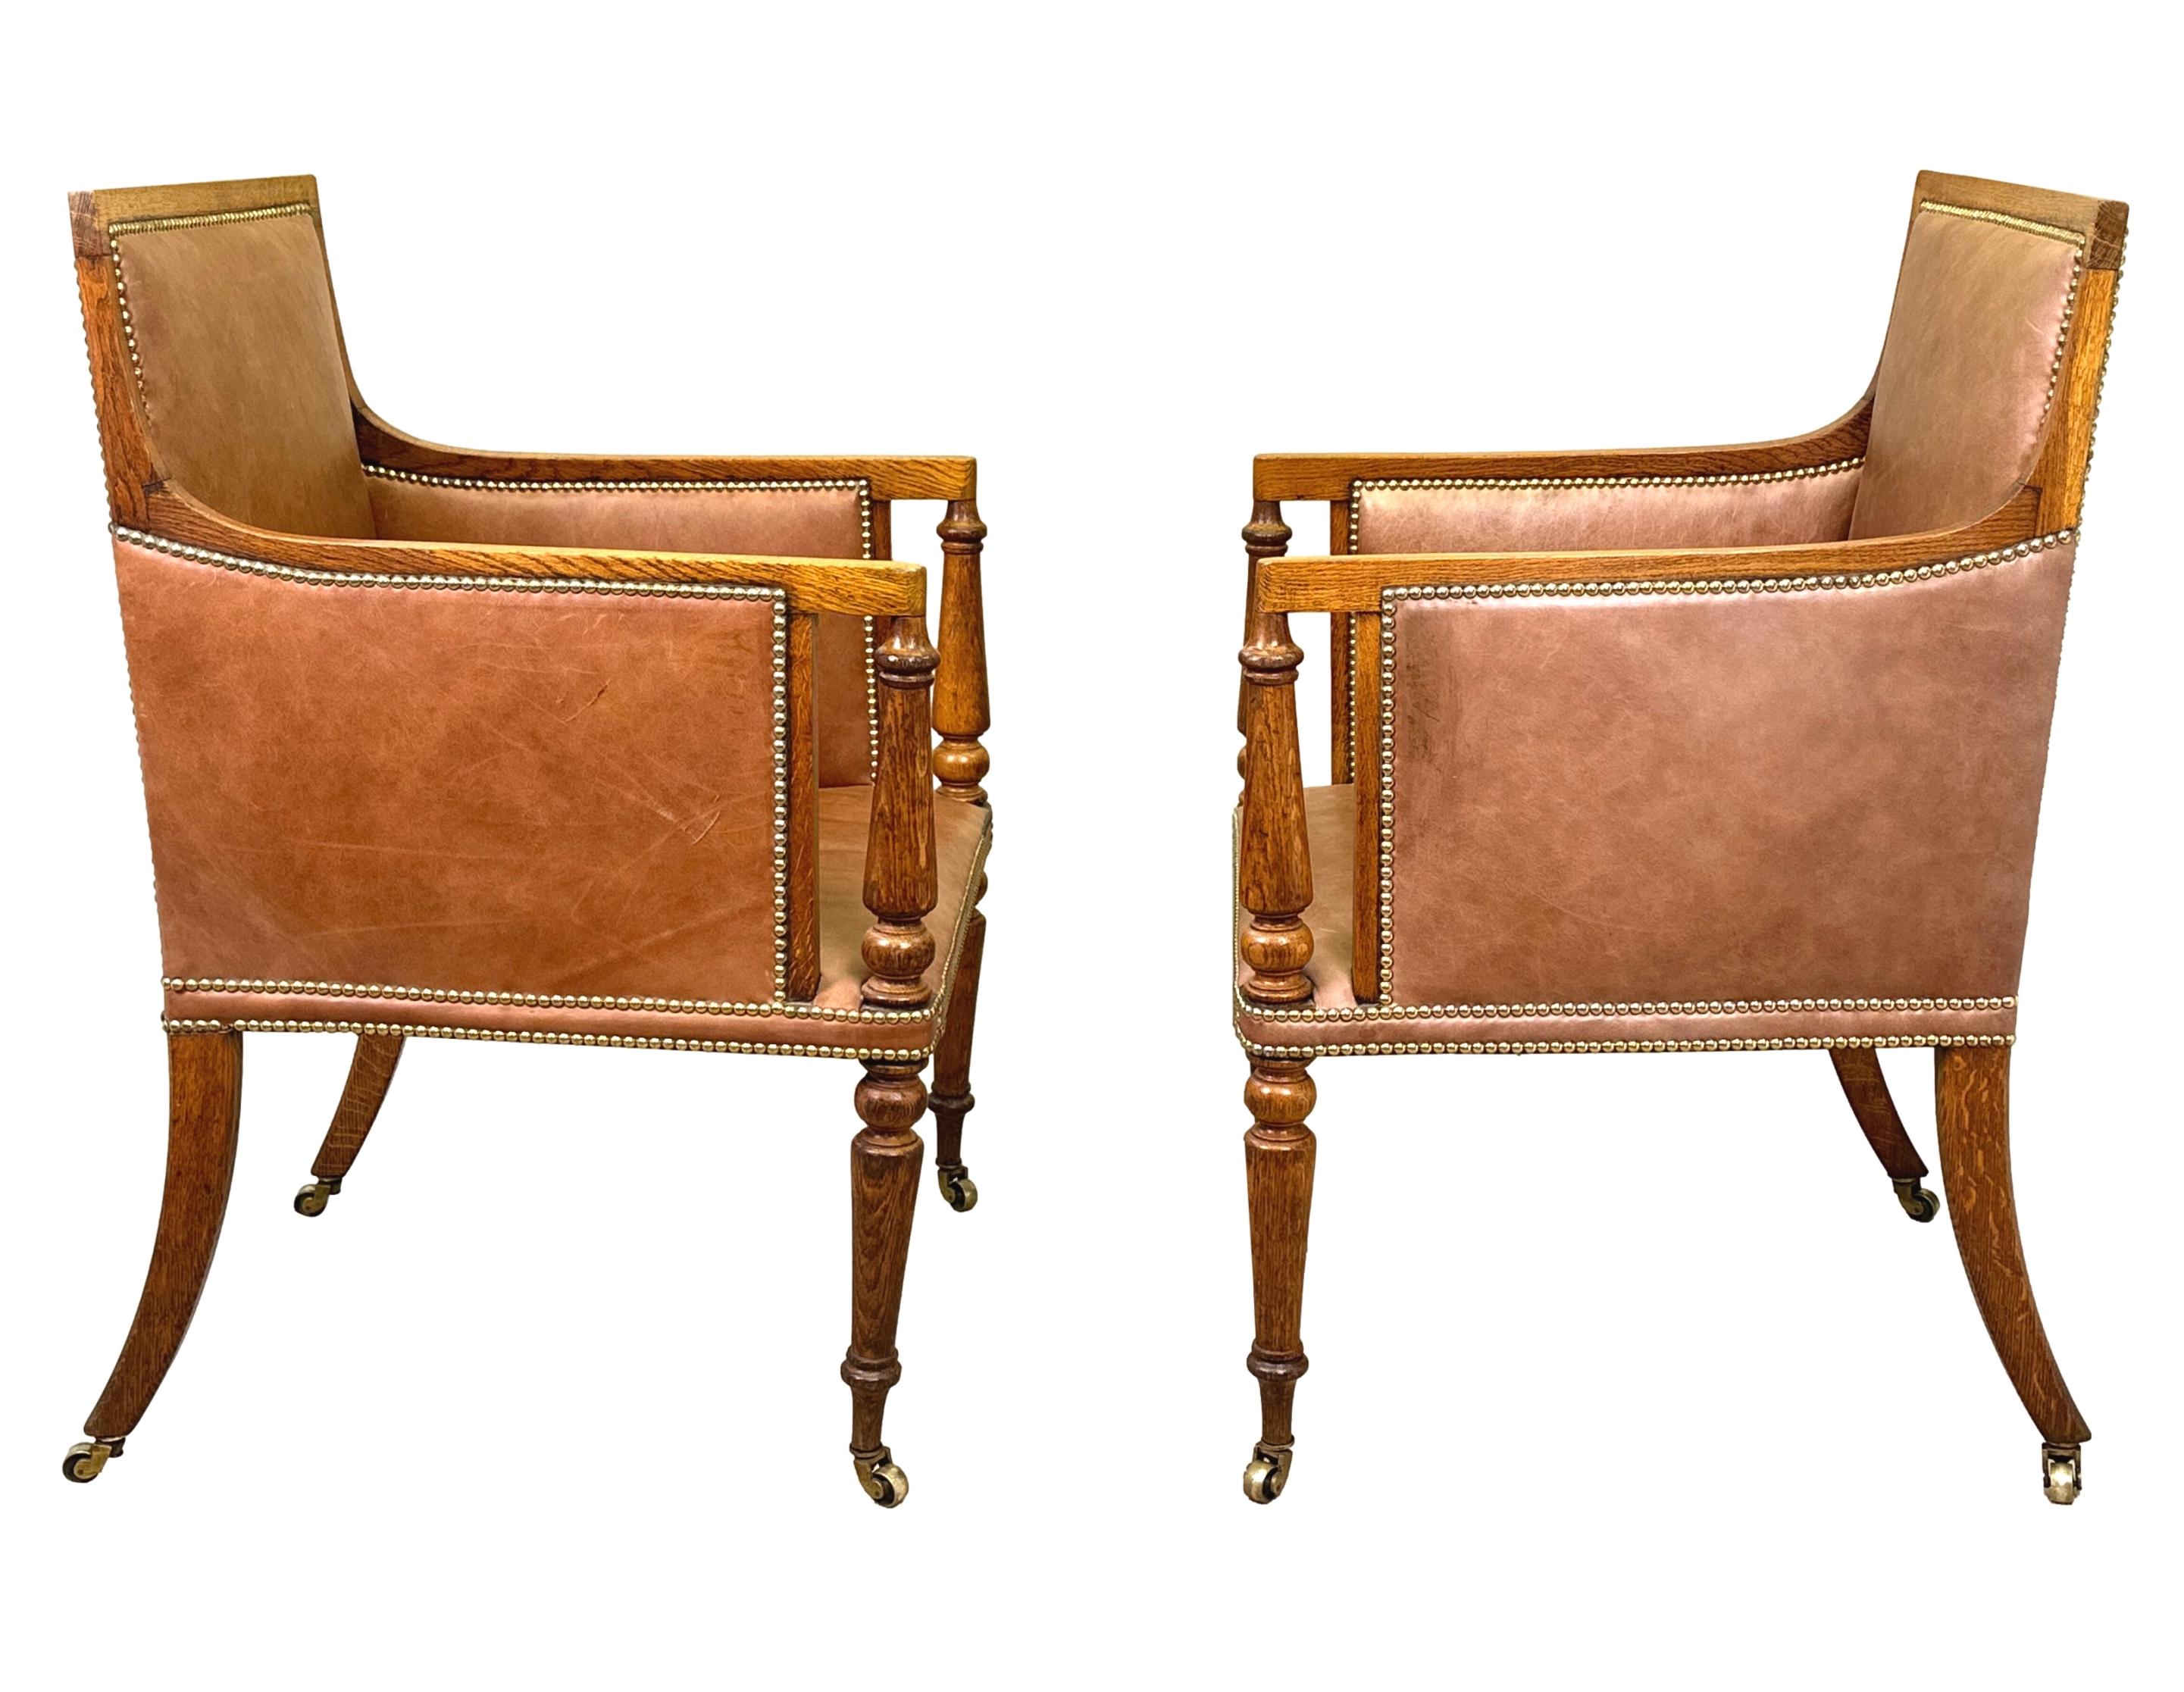 An Extremely Good Quality And Unusual 19th Century, Regency Period, Pair Of Golden Oak Library Bergere Armchairs, Upholstered In Attractive Tan Leather, Having Upright Backs And Scrolling Arms With Elegant Turned Upright Supports, Raised On Fine